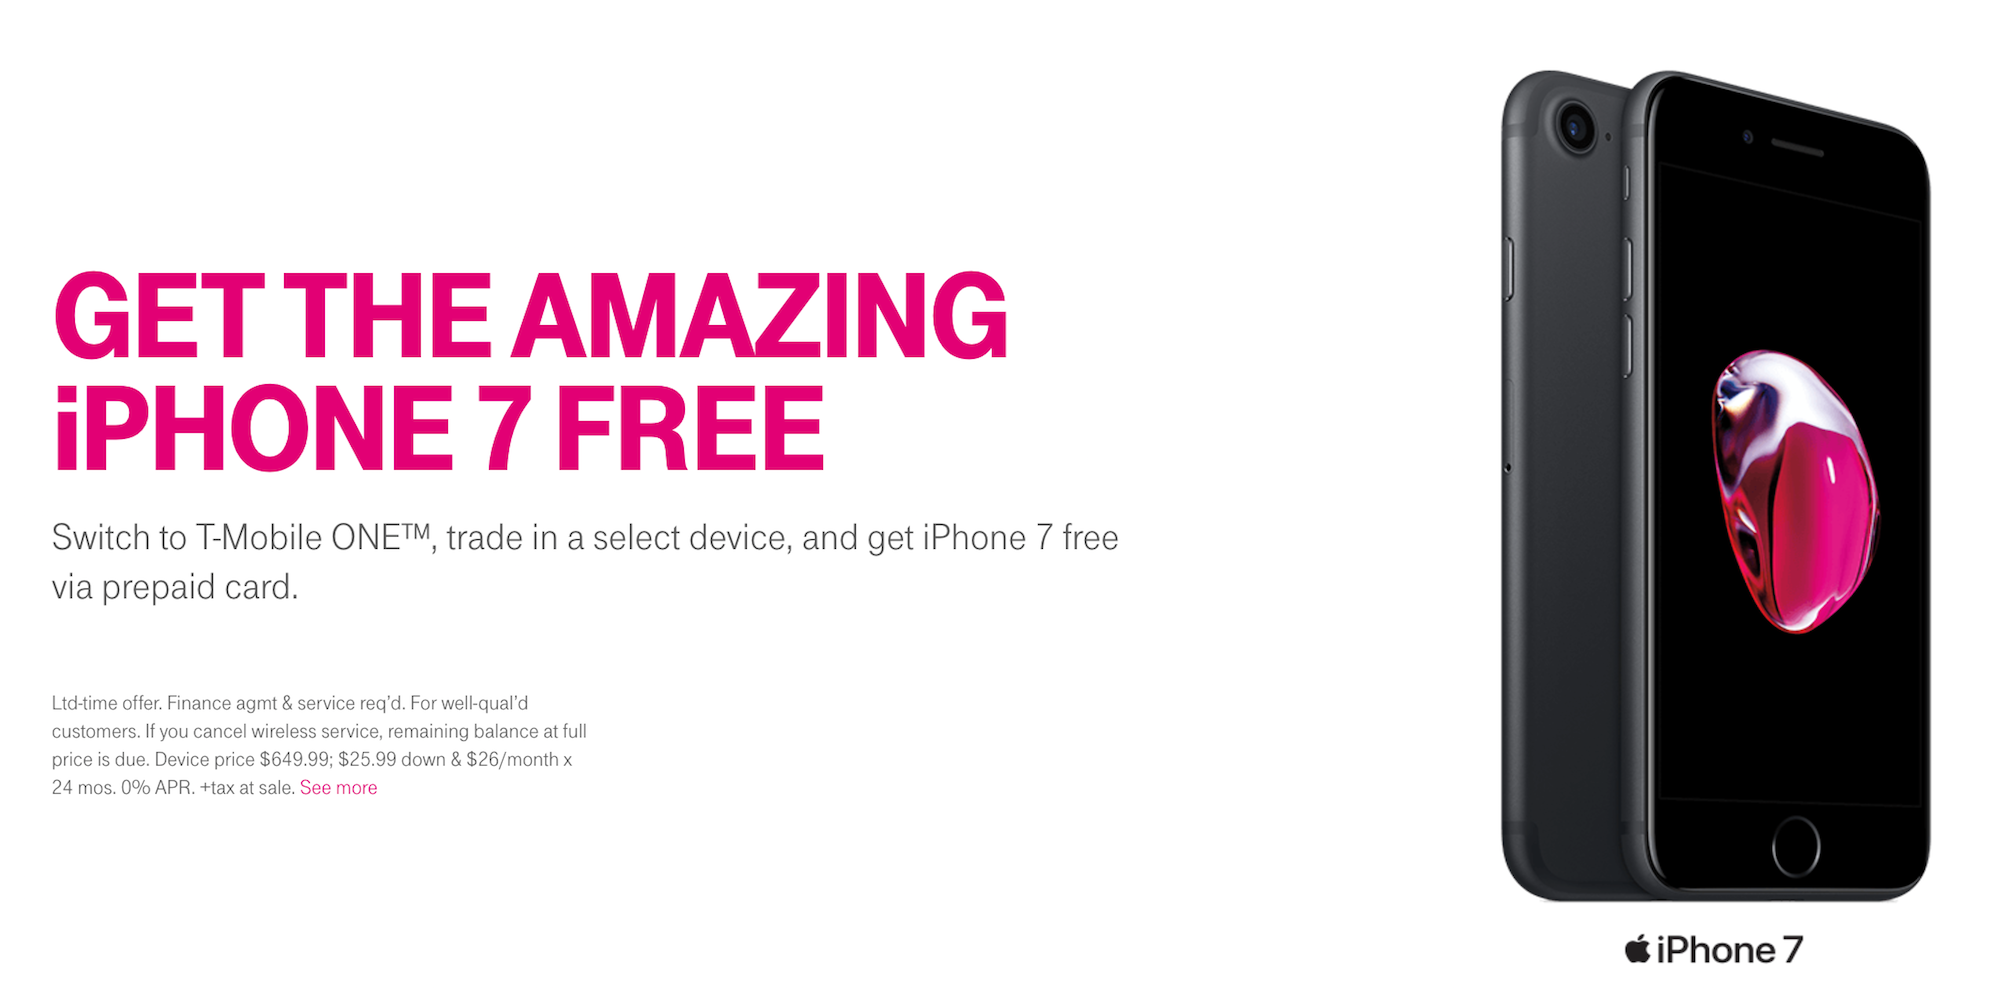 T-Mobile announces free iPhone 7 promo for switchers ...